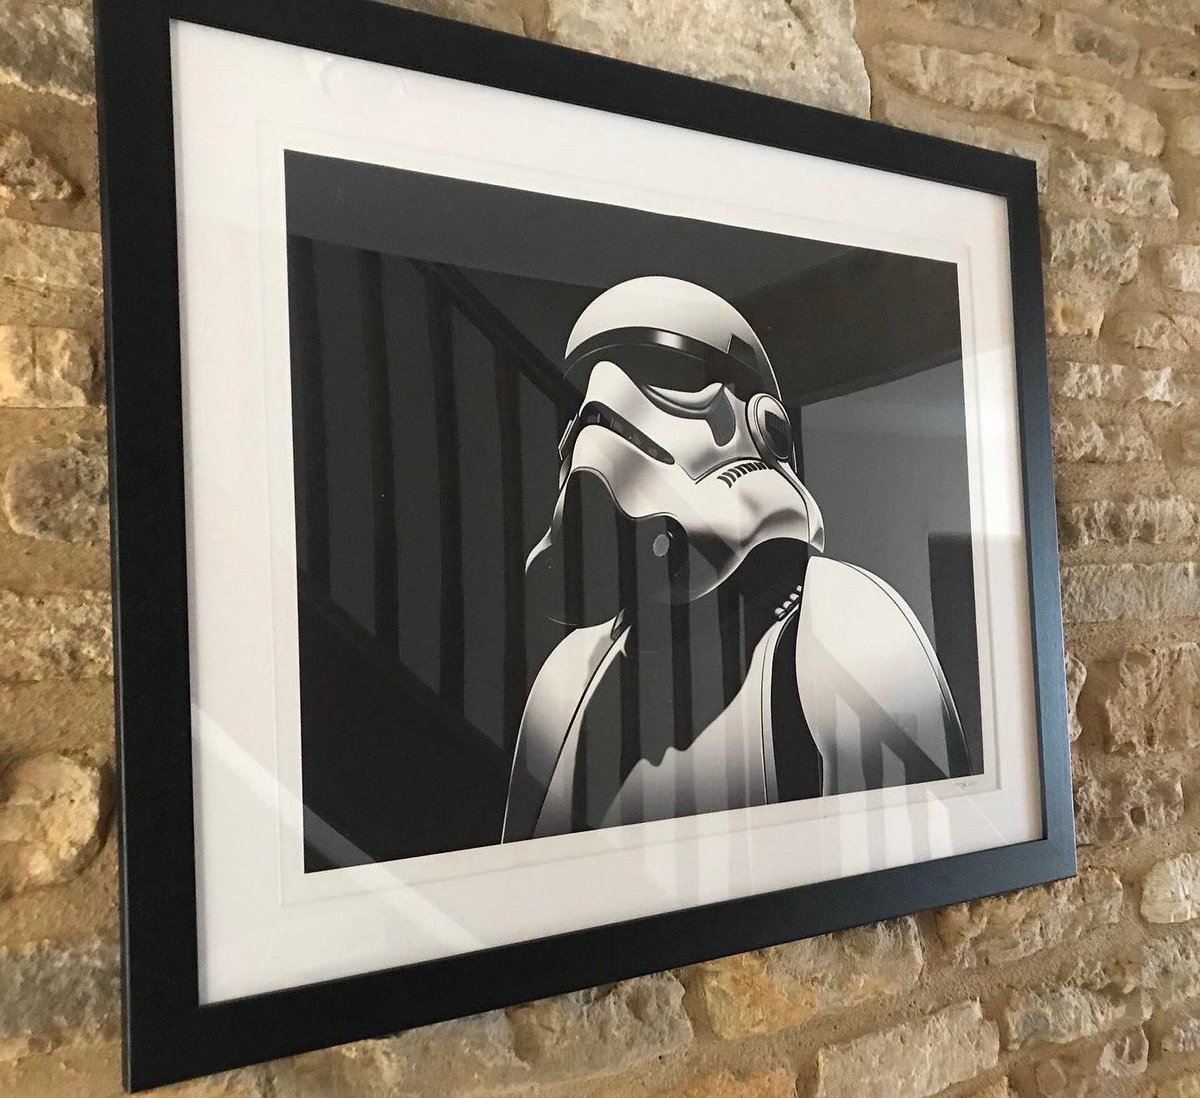 Happy Star Wars day! To celebrate I’m knocking 15% OFF all Star Wars prints in my shop. Just use the codeword: MAY4 at checkout. infinitebacon.com AND RT and follow to win this signed 24”x17” giclee Trooper print. Draw Tomorrow evening at 6pm. Good luck and thank you!